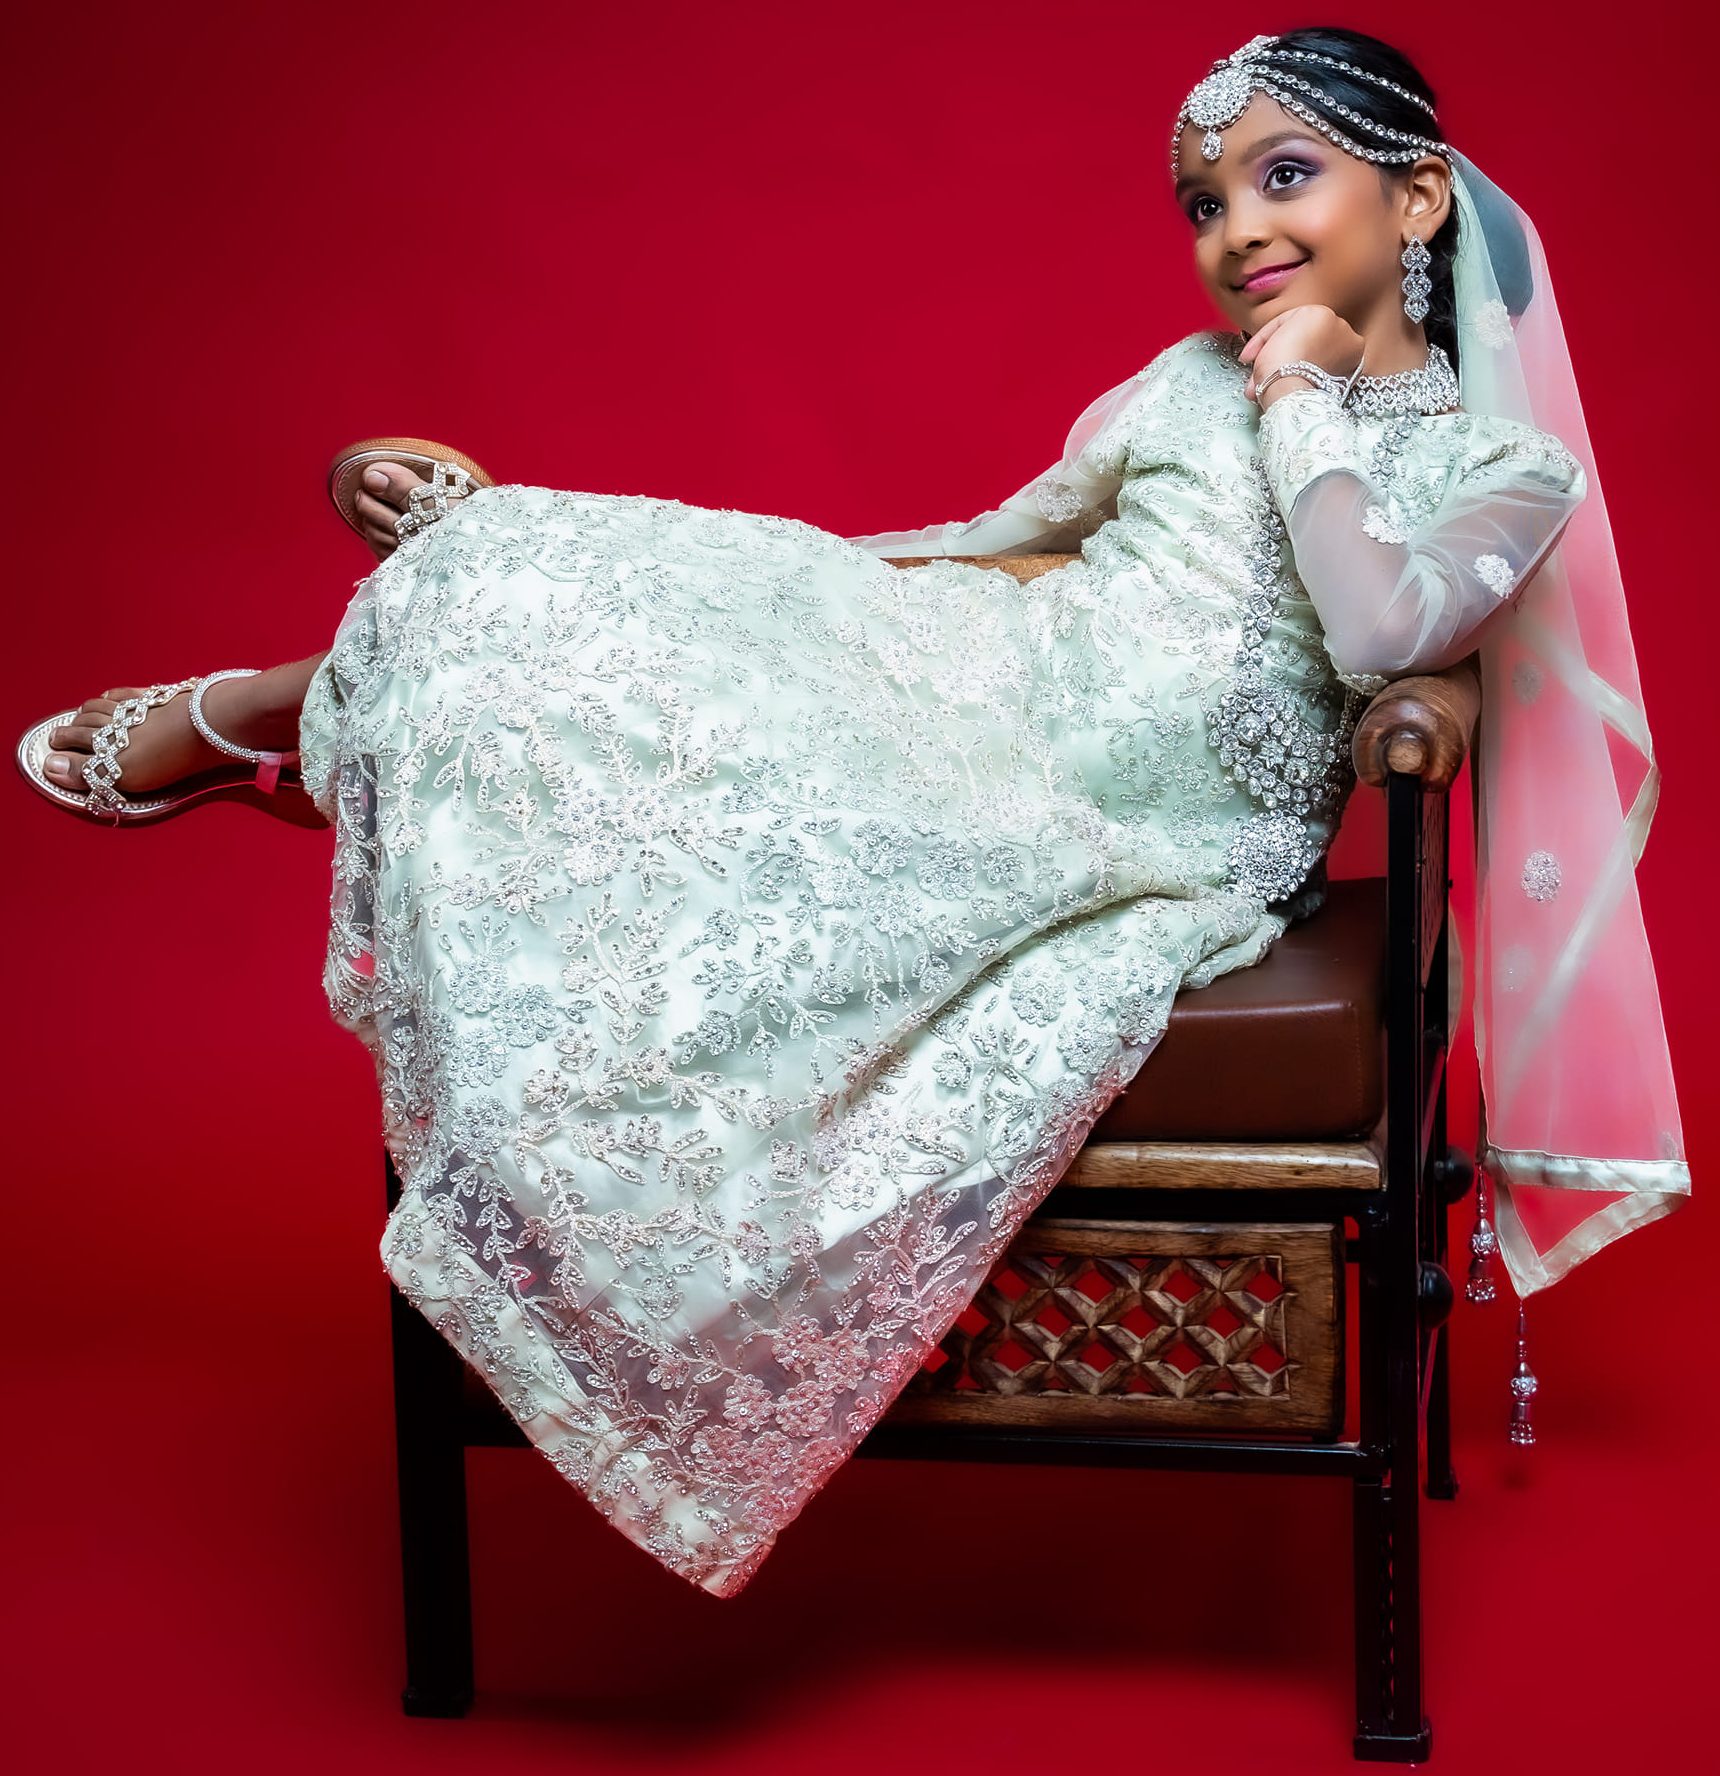 Katelin Sultan is the First Ever Princess of Chutney Music